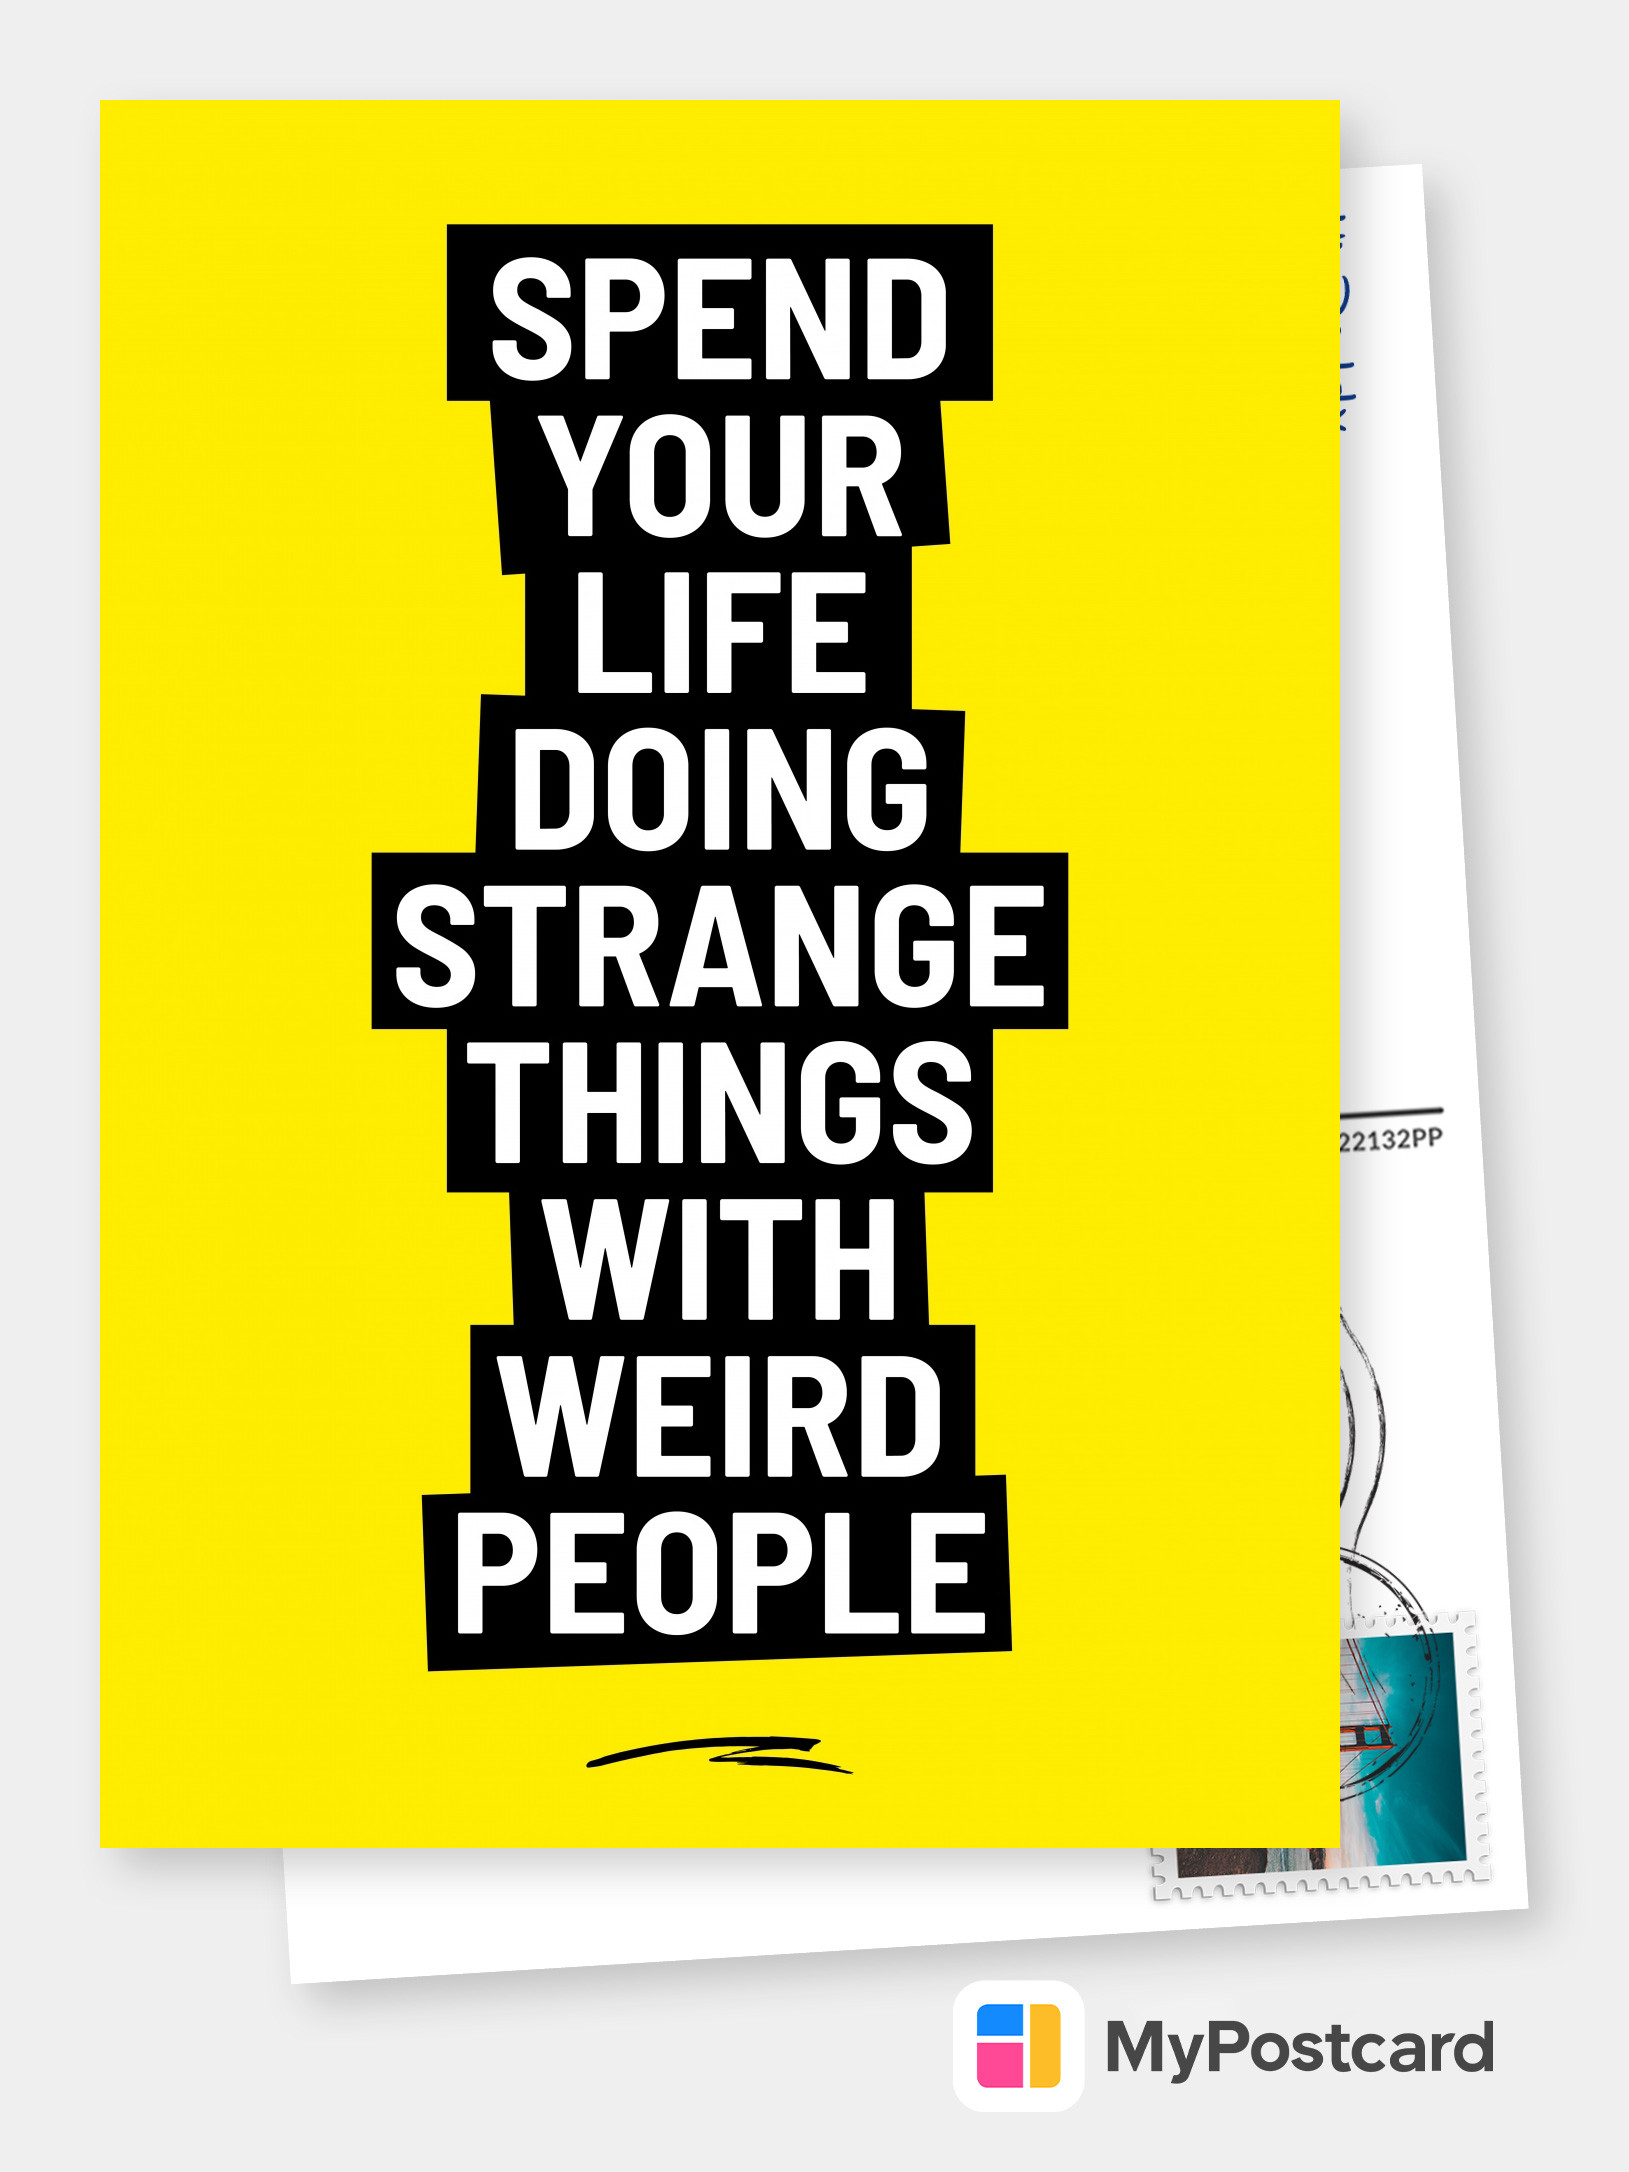 SPEND YOUR LIFE DOING STRANGE THINGS WITH WEIRD PEOPLE-Funny Quotes | Funny  Cards & Quotes | Send real postcards online